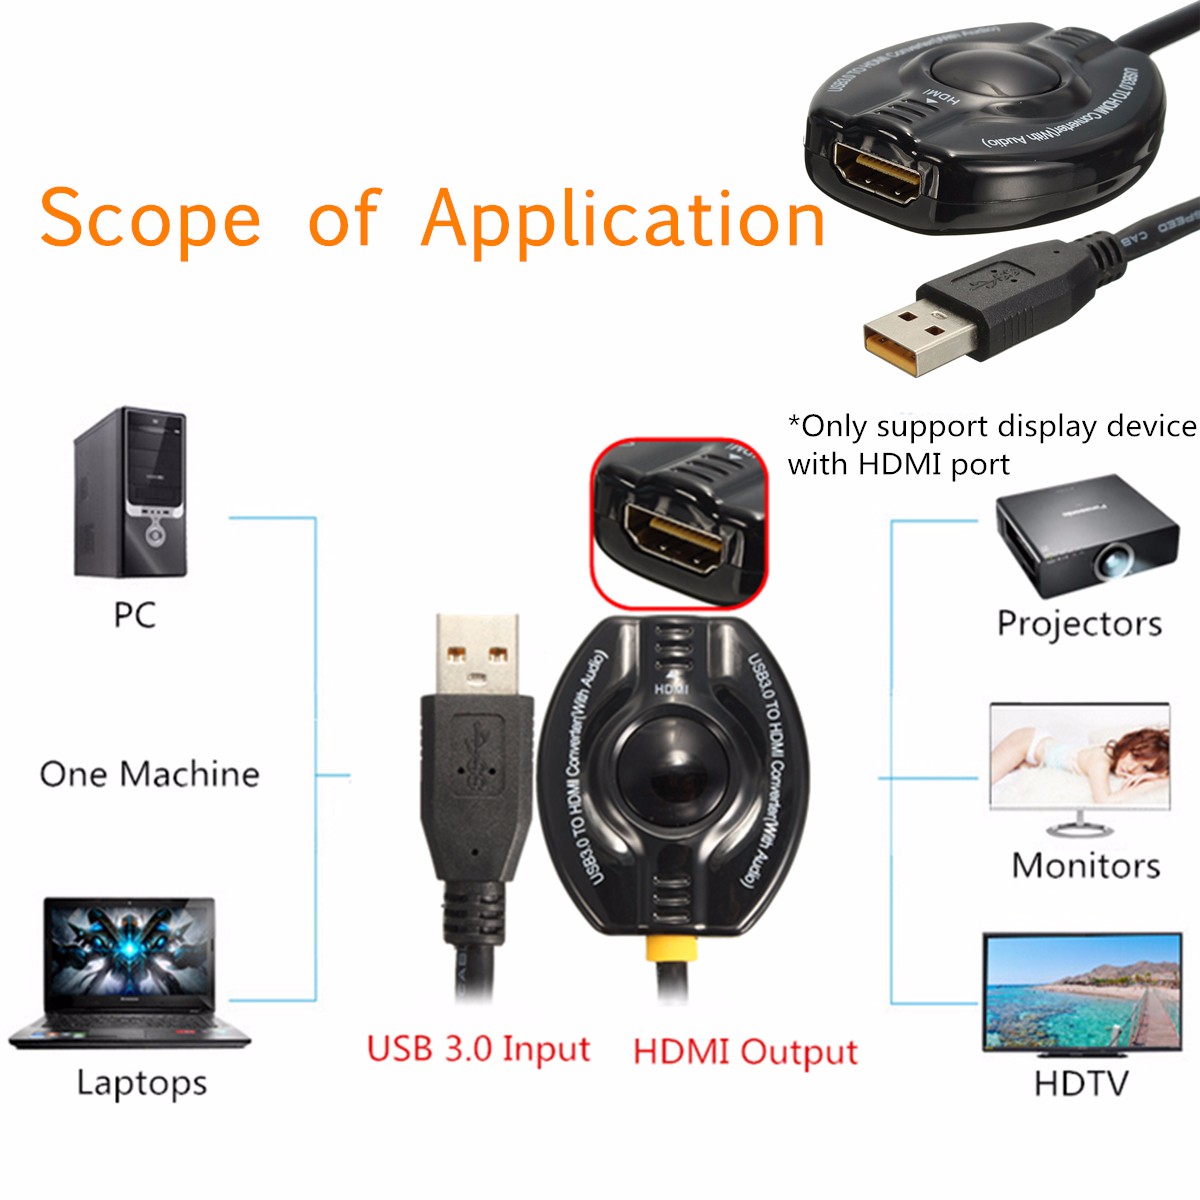 USB-30-to-HDMI-Adapter-Cable-5-Gbps-support-1080P-Projector-POS-System-CRT-LCD-LED-Monitor-1973033-2